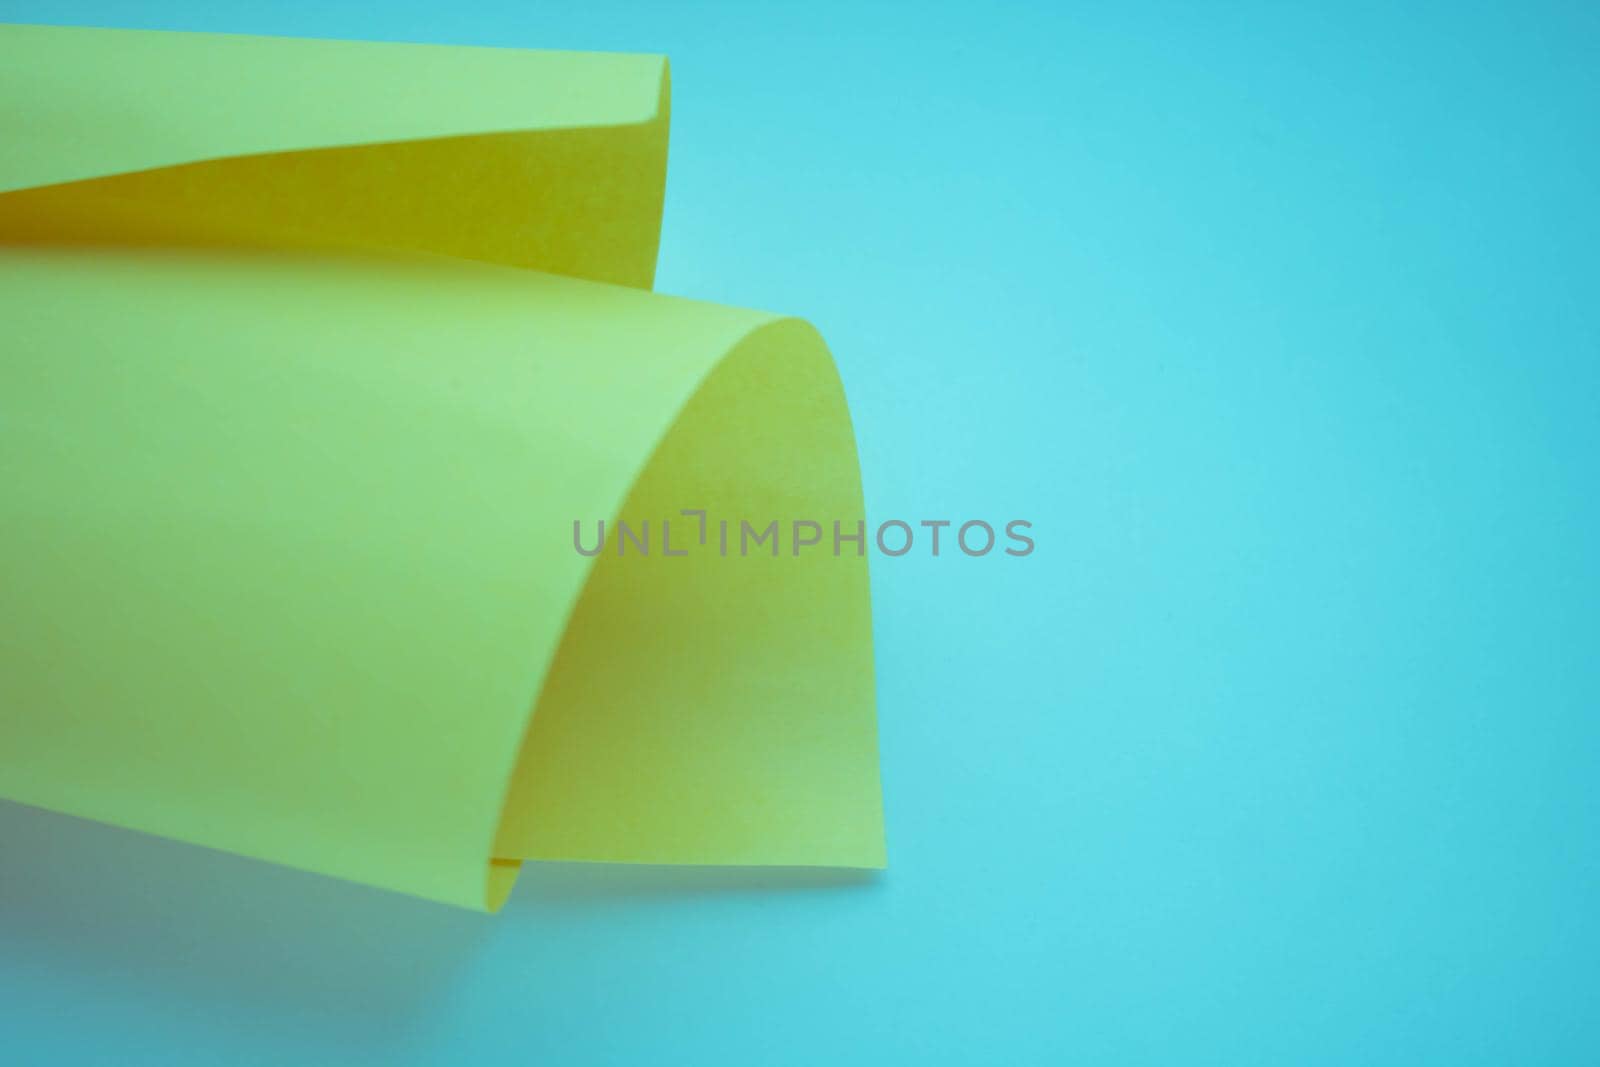 A roll of yellow paper isolated on a blue background.space for text.